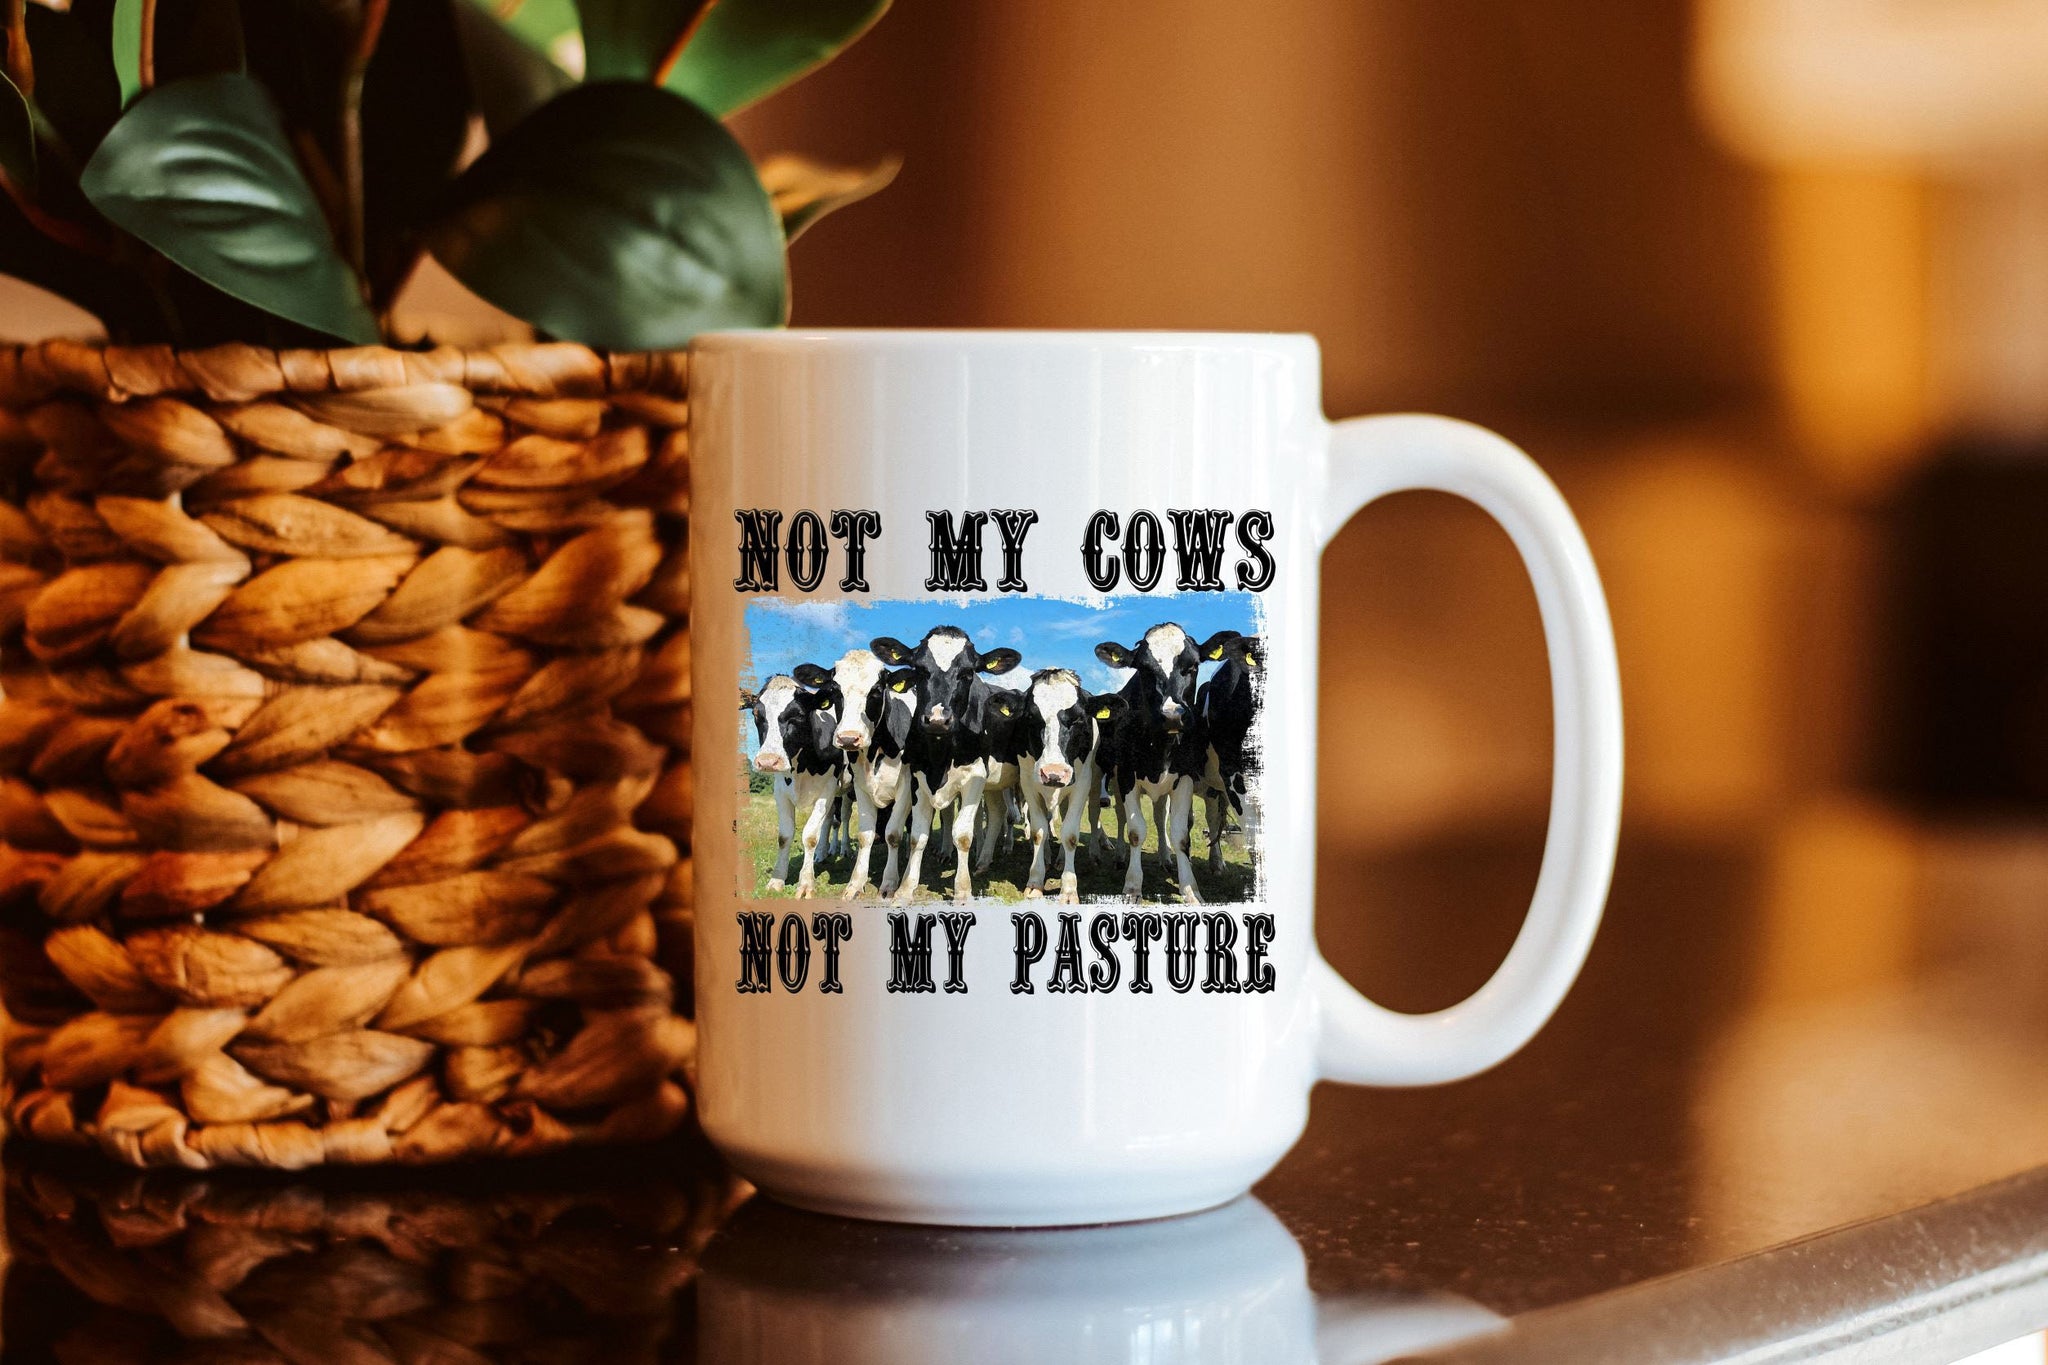 Not My Cows Not My Pasture Funny Livestock 4-H FFA Agriculture Coffee Mug Gift For Her, Funny Cow Pasture Agriculture Gift For Farmer Mom